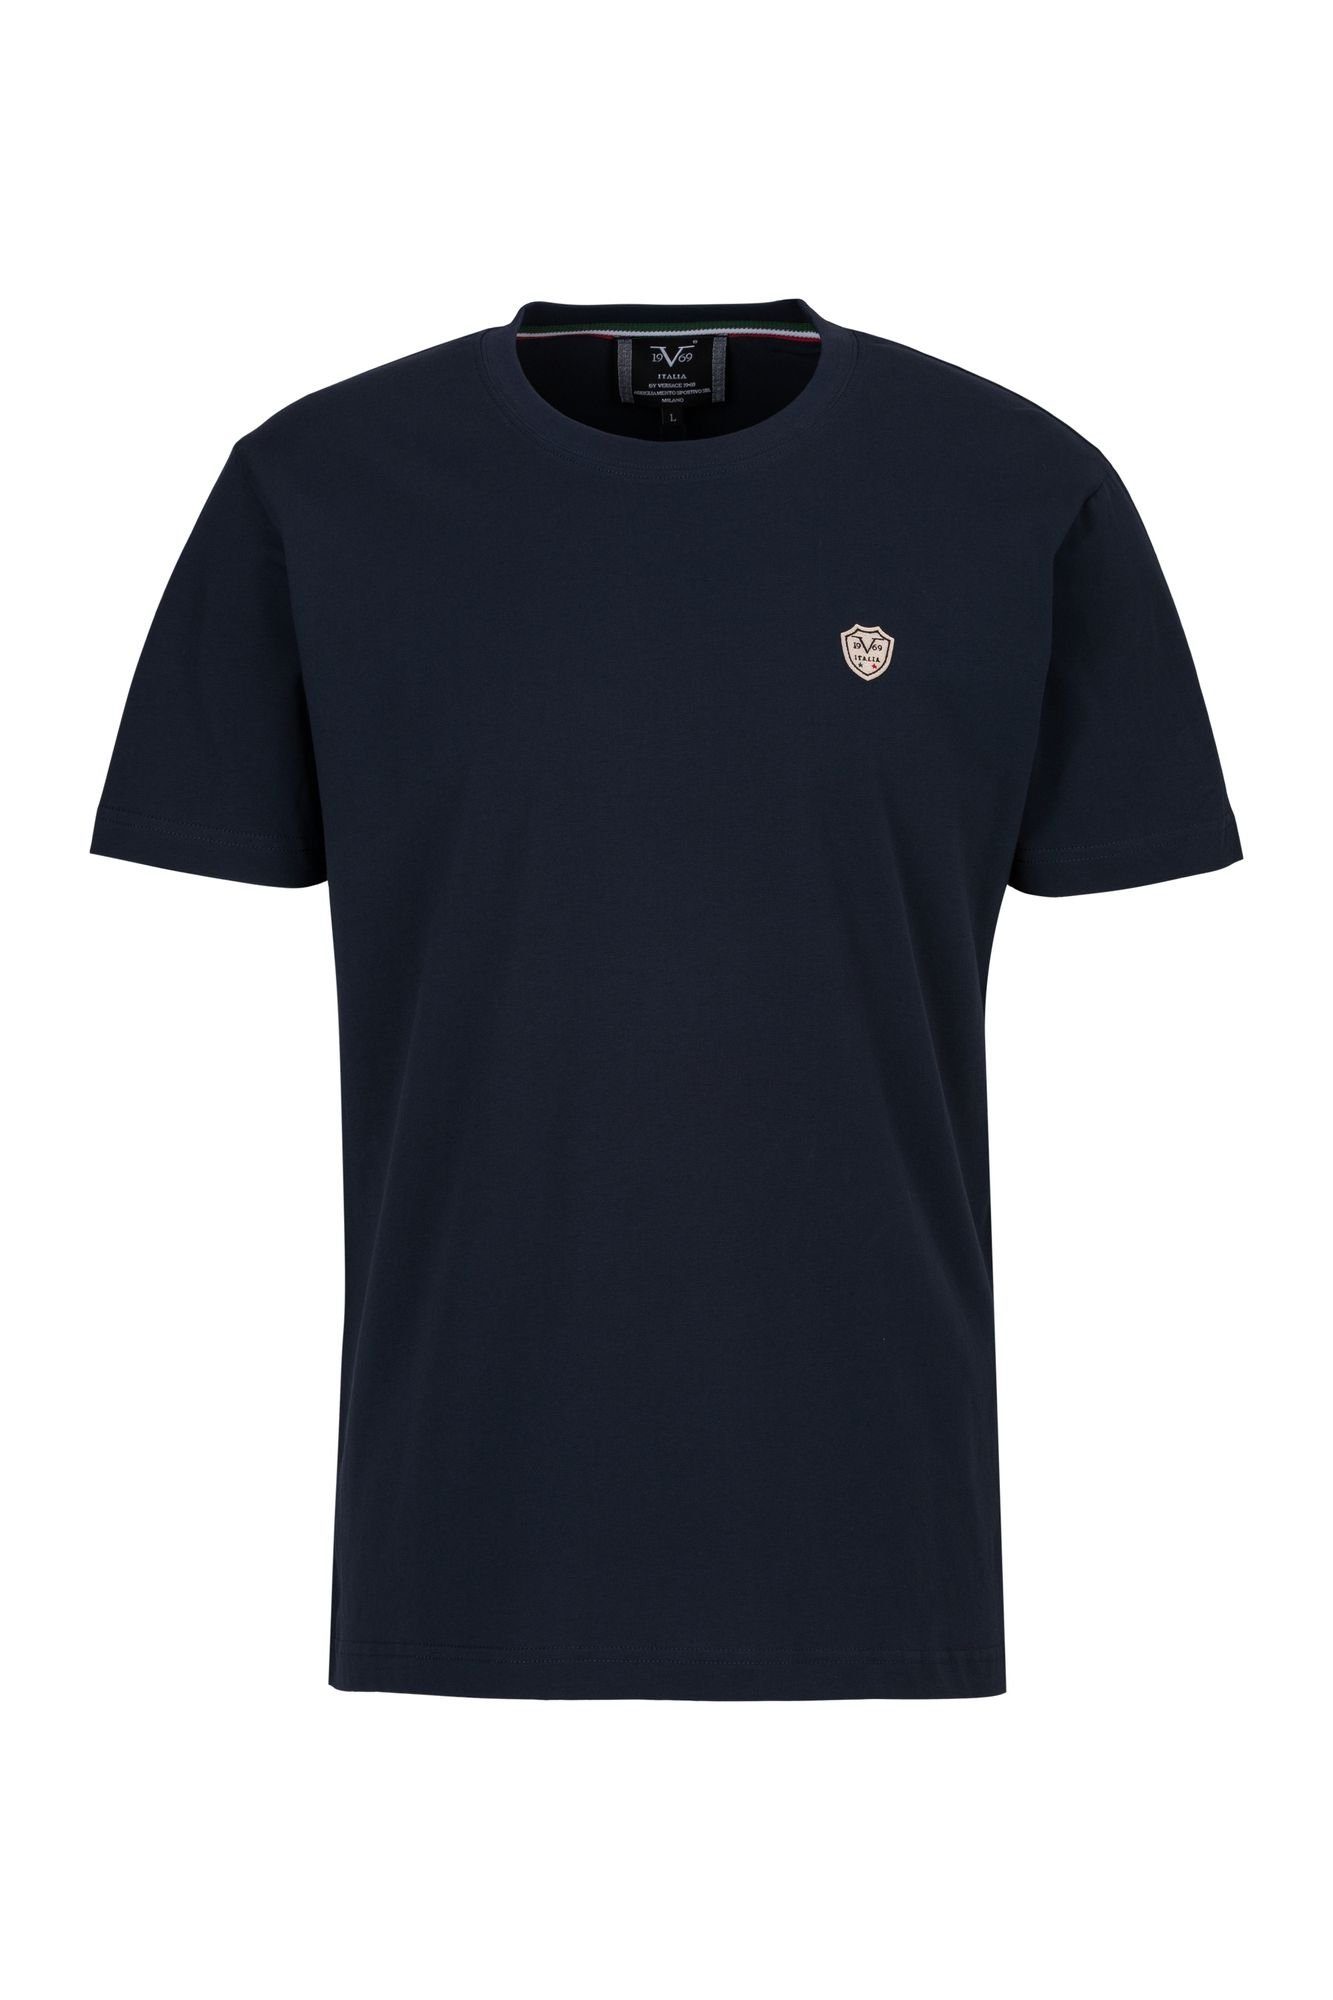 19V69 Italia by Versace T-Shirt Injection